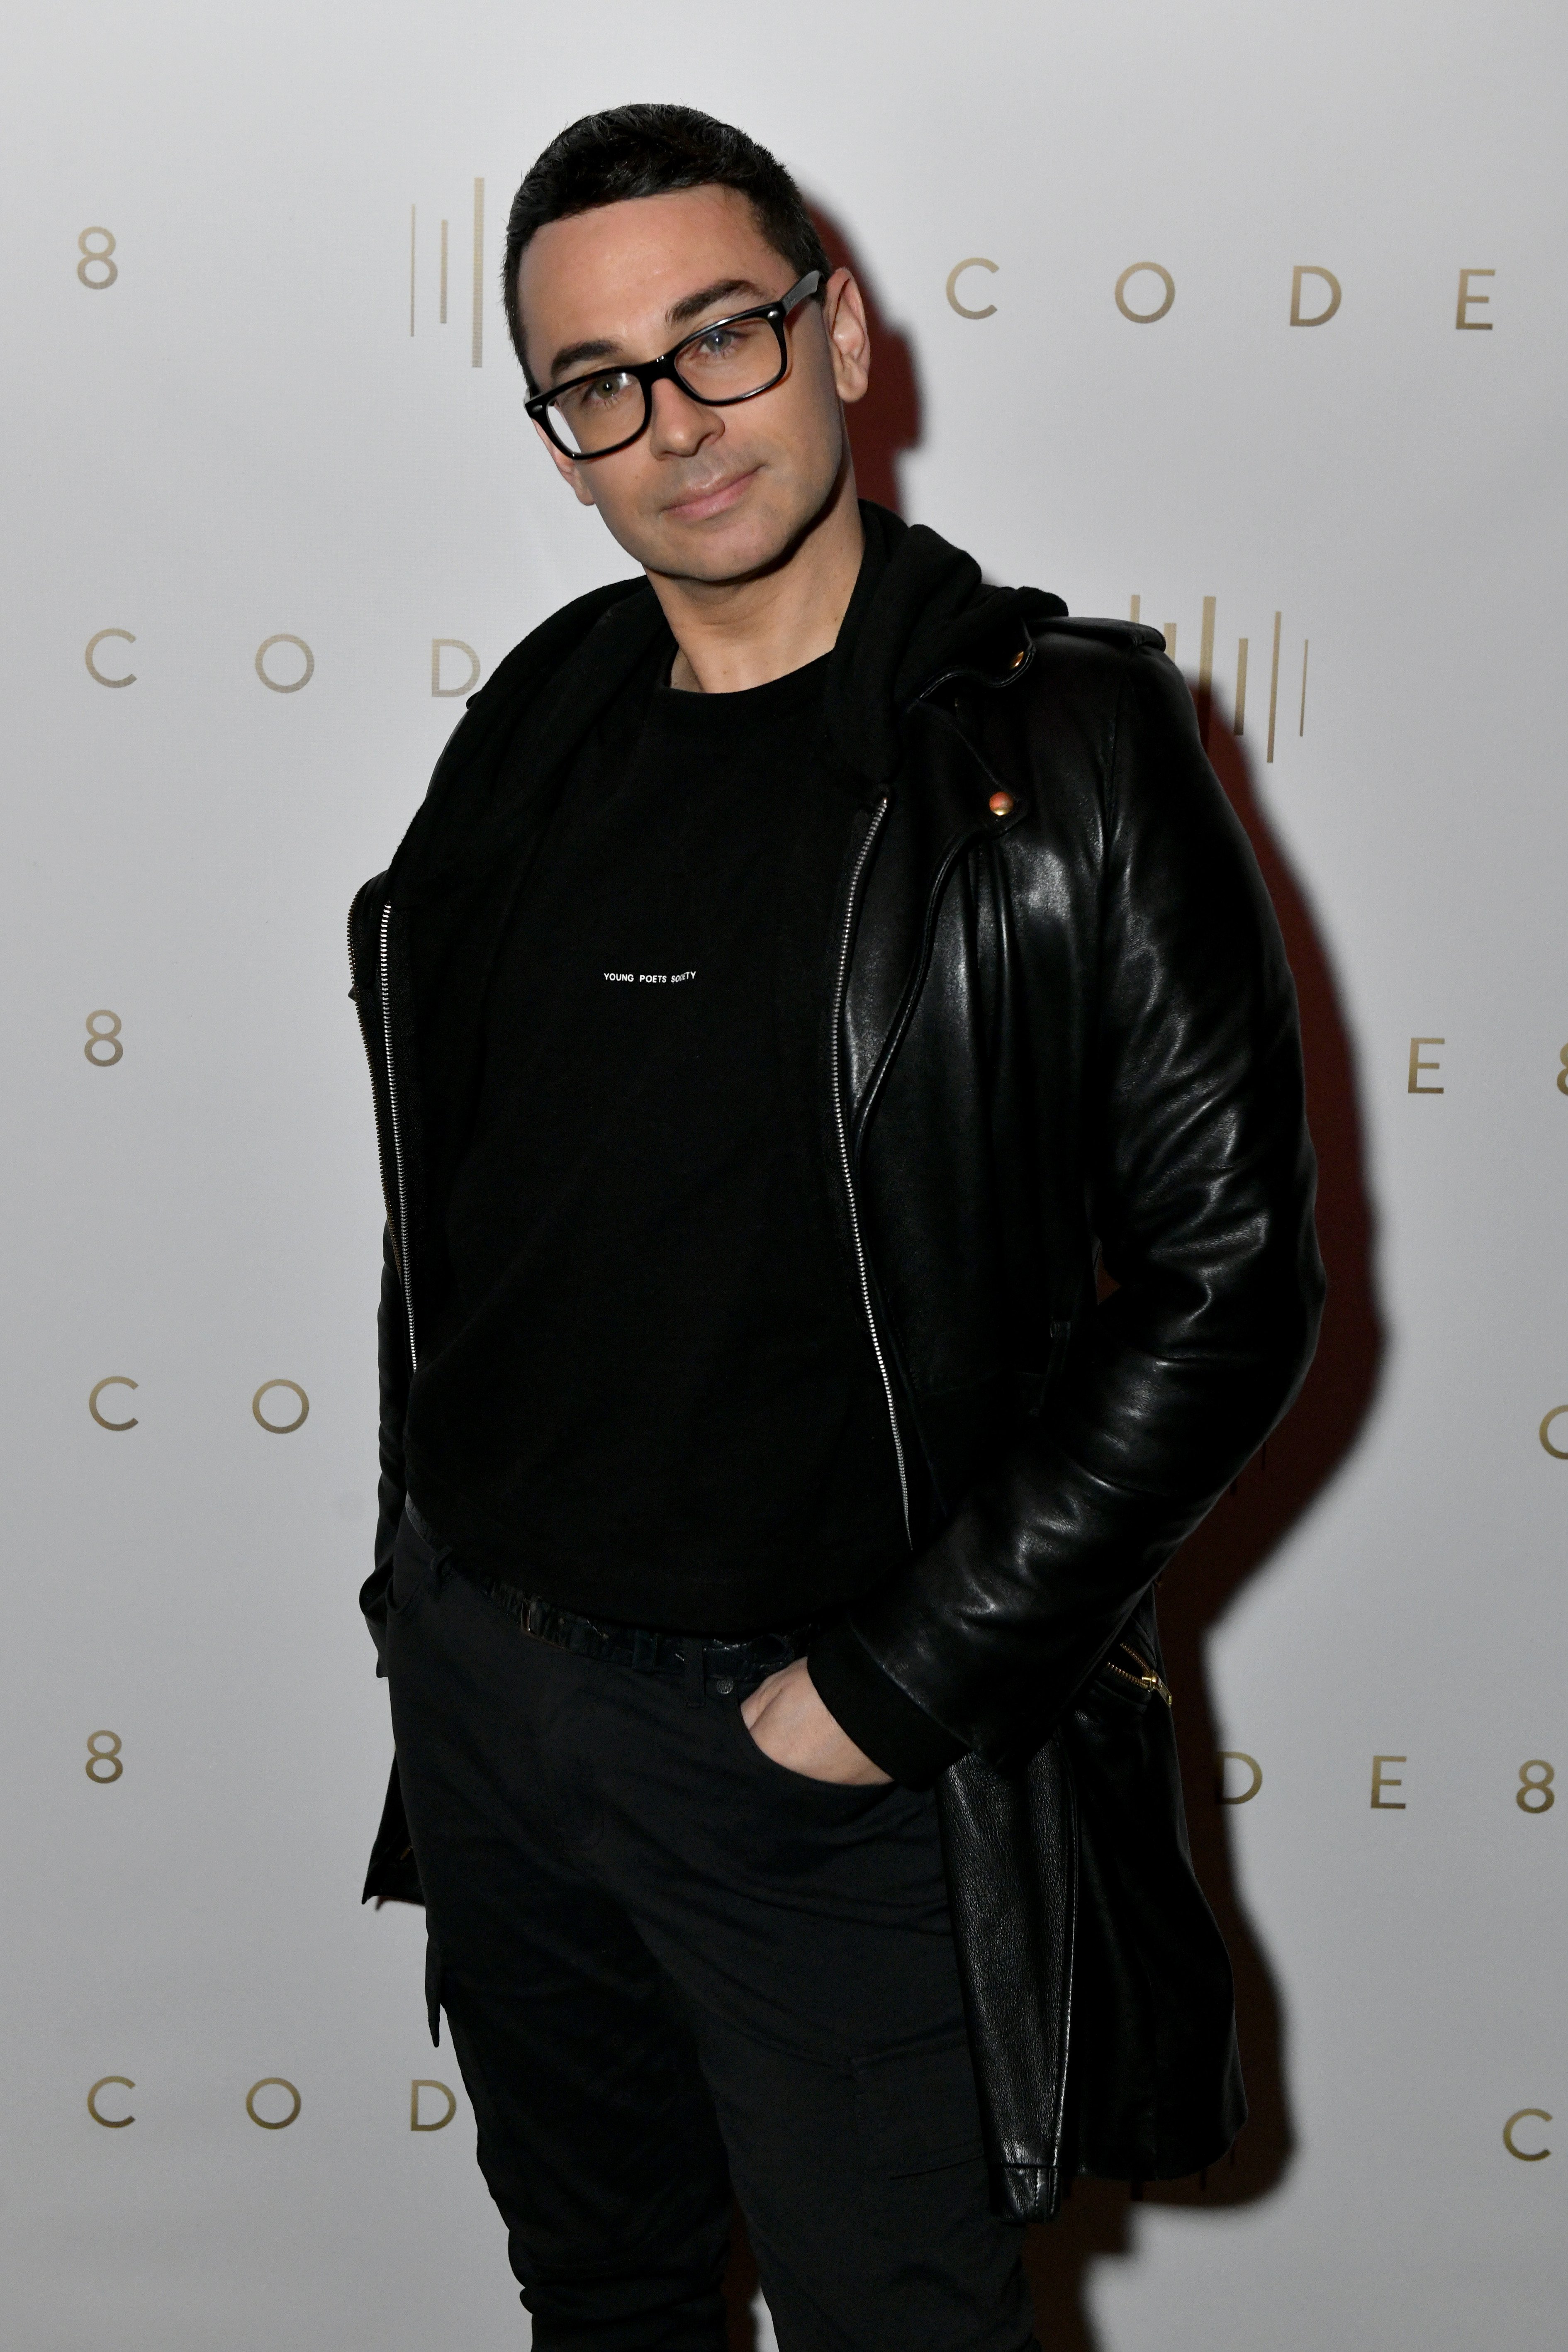 Christian Siriano poses at the CODE8 NYC Launch Event on November 9, 2022, in New York City | Source: Getty Images